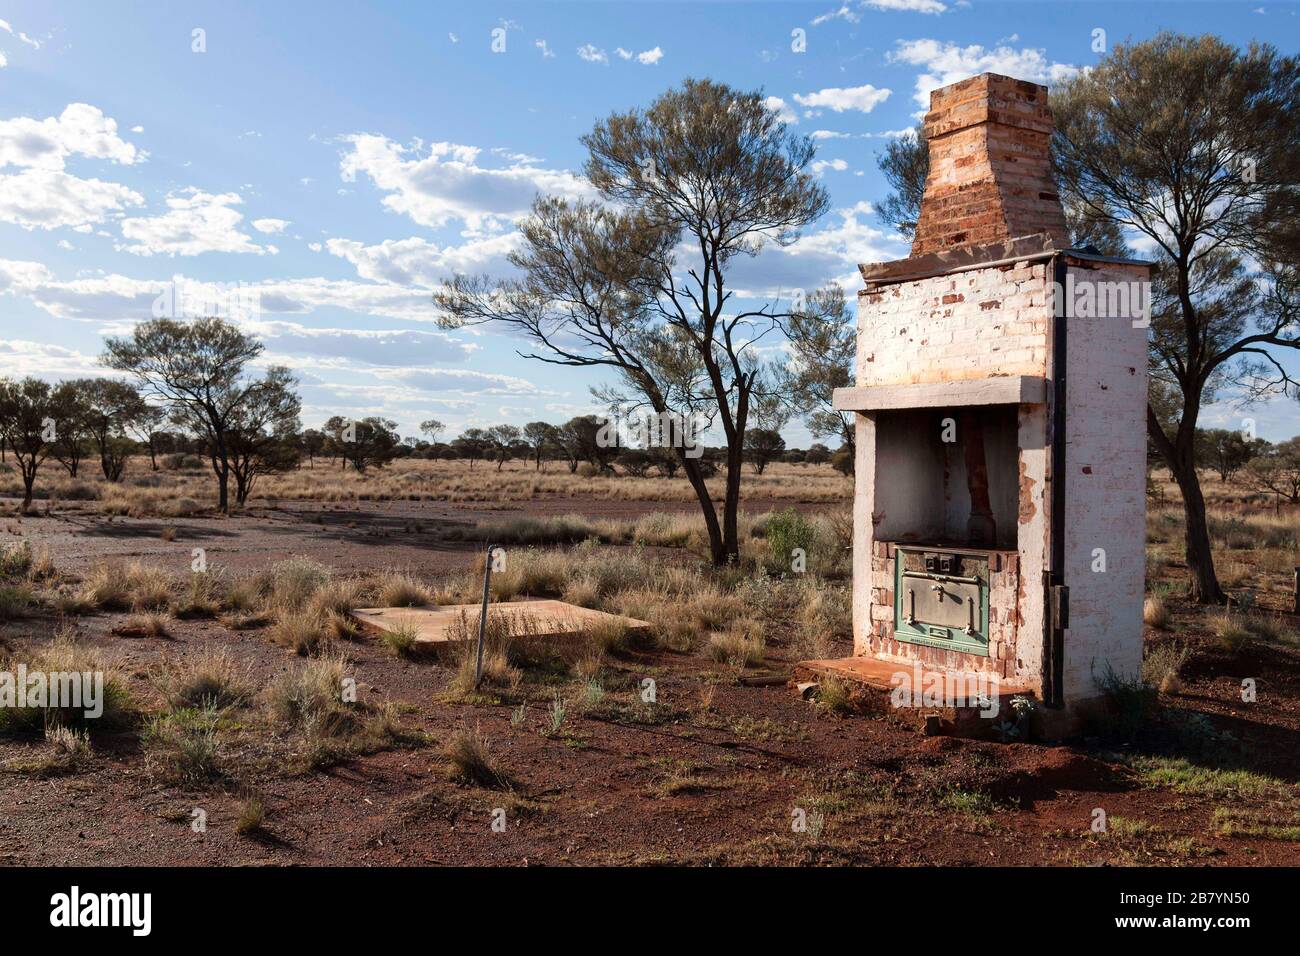 Metters stove and Chimney, Lake Mason abandoned outback homestead, Central Midlands Western Australia Stock Photo